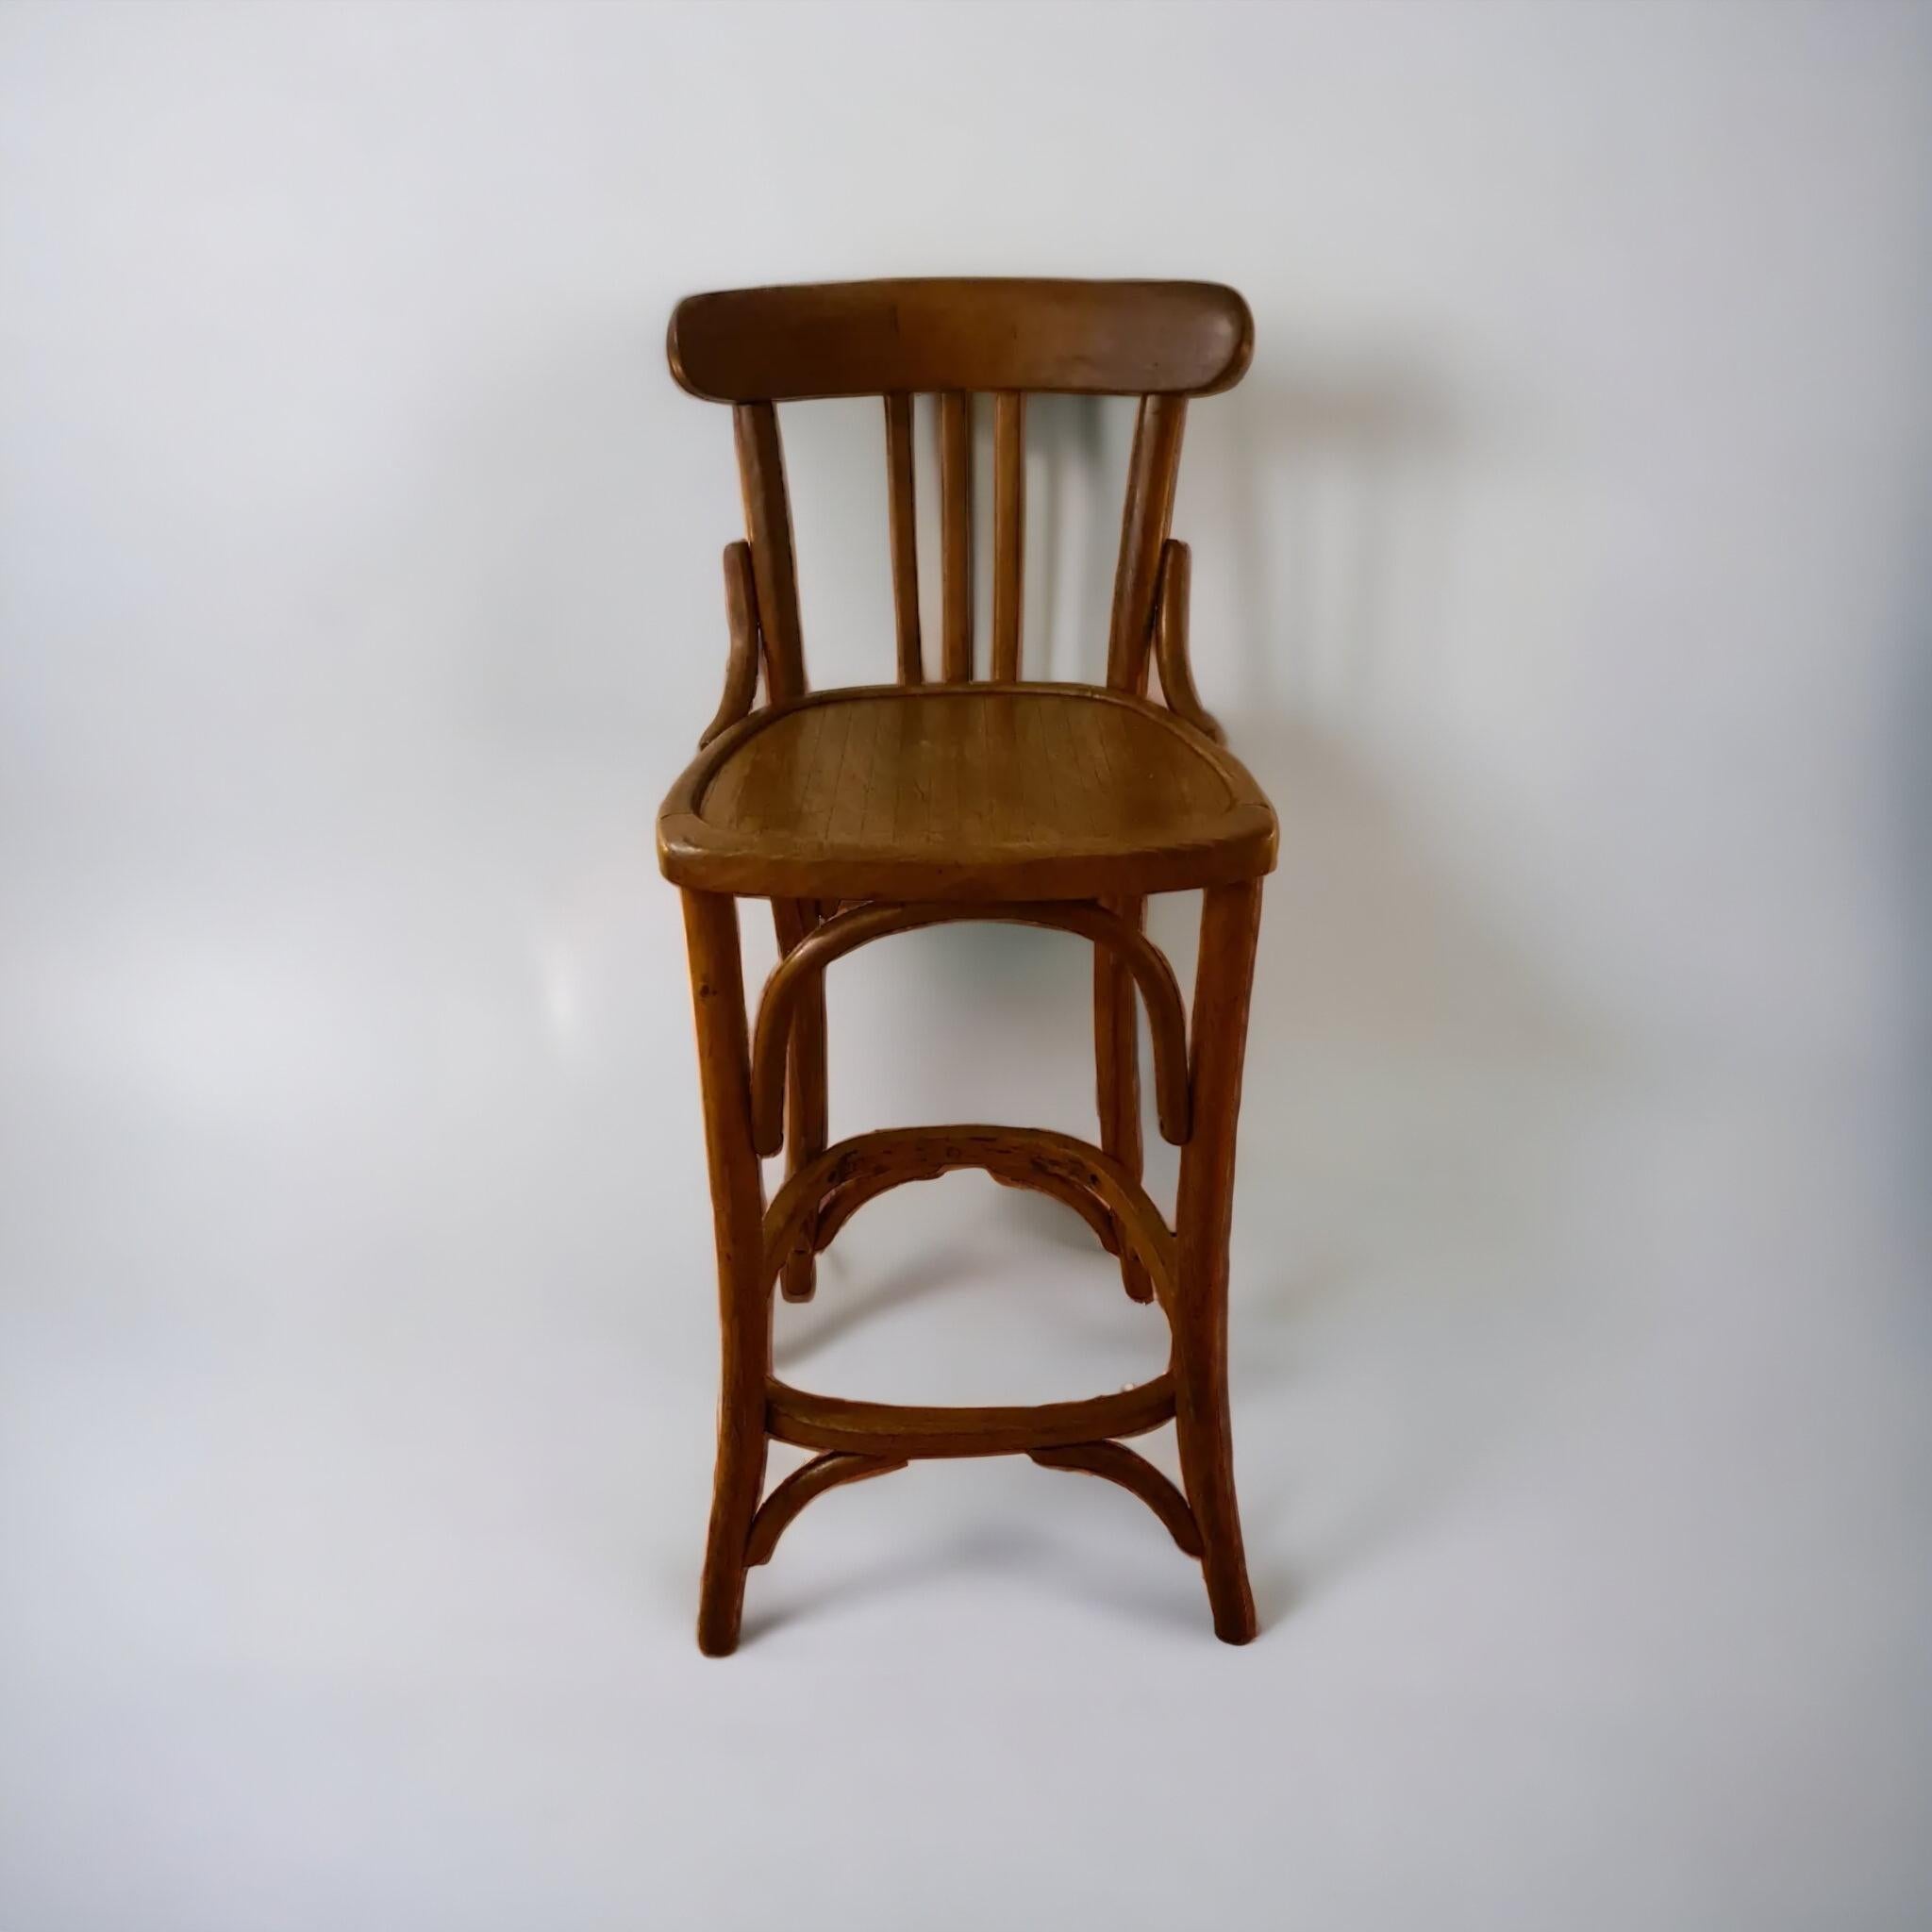 Thonet style high stool in curved wood, 20th century, great patina 


Thonet opened his own cabinetmaking workshop in 1819, but it was in the early 1840s that he began experimenting with folding and gluing wooden sticks. Thus, in 1841, the first